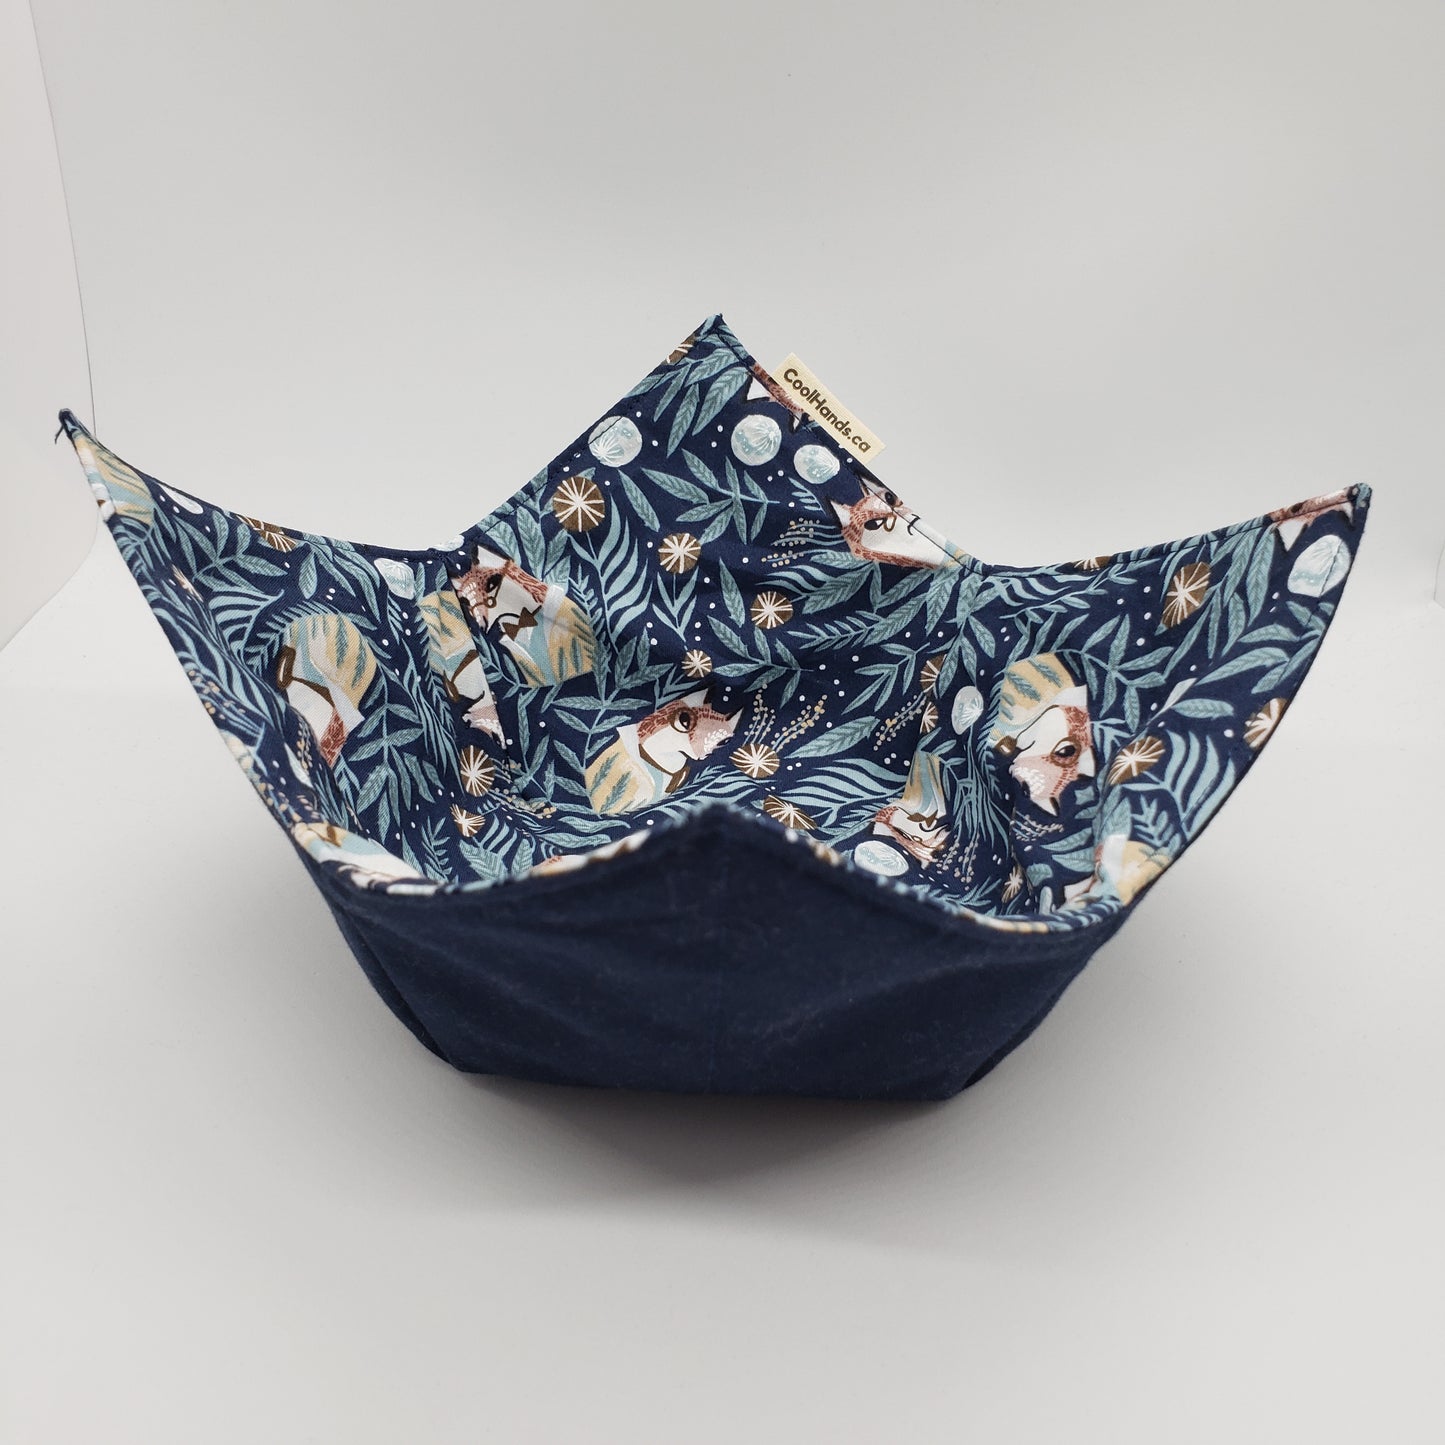 100% Cotton Microwavable Bowl Cozy - "Clever As A Fox"